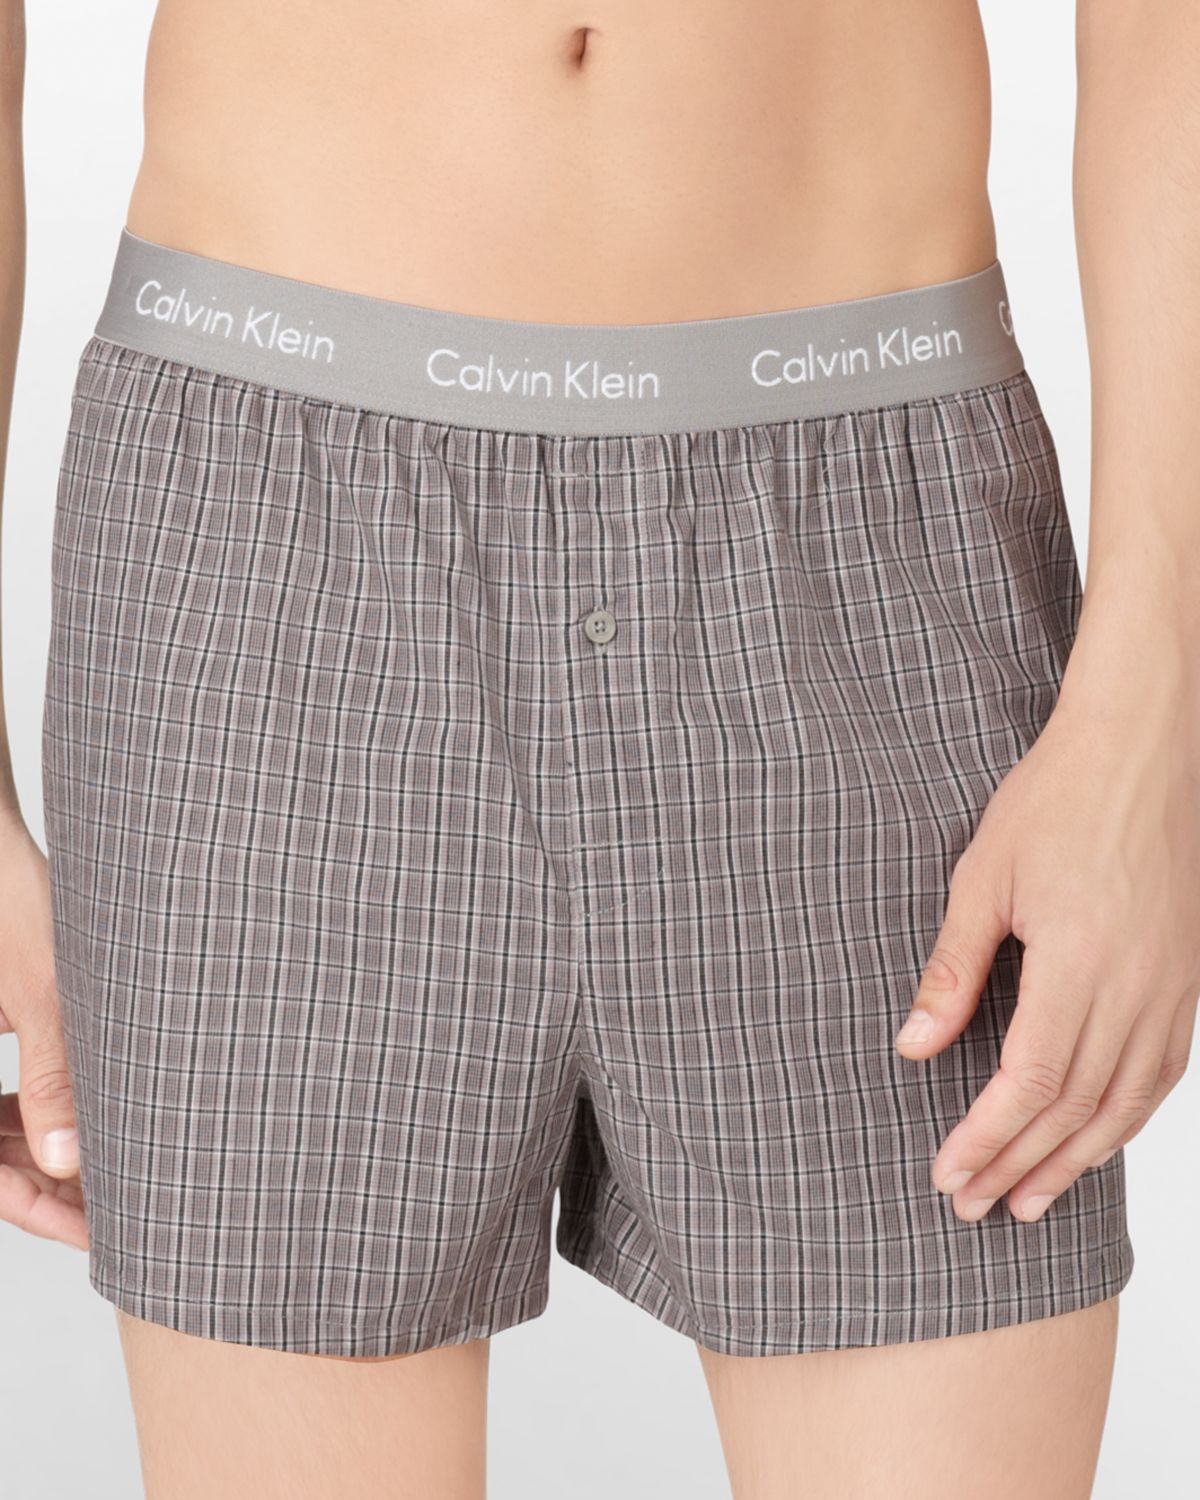 Calvin Klein Slim Fit Woven Plaid Boxer Shorts in Gray for Men - Lyst